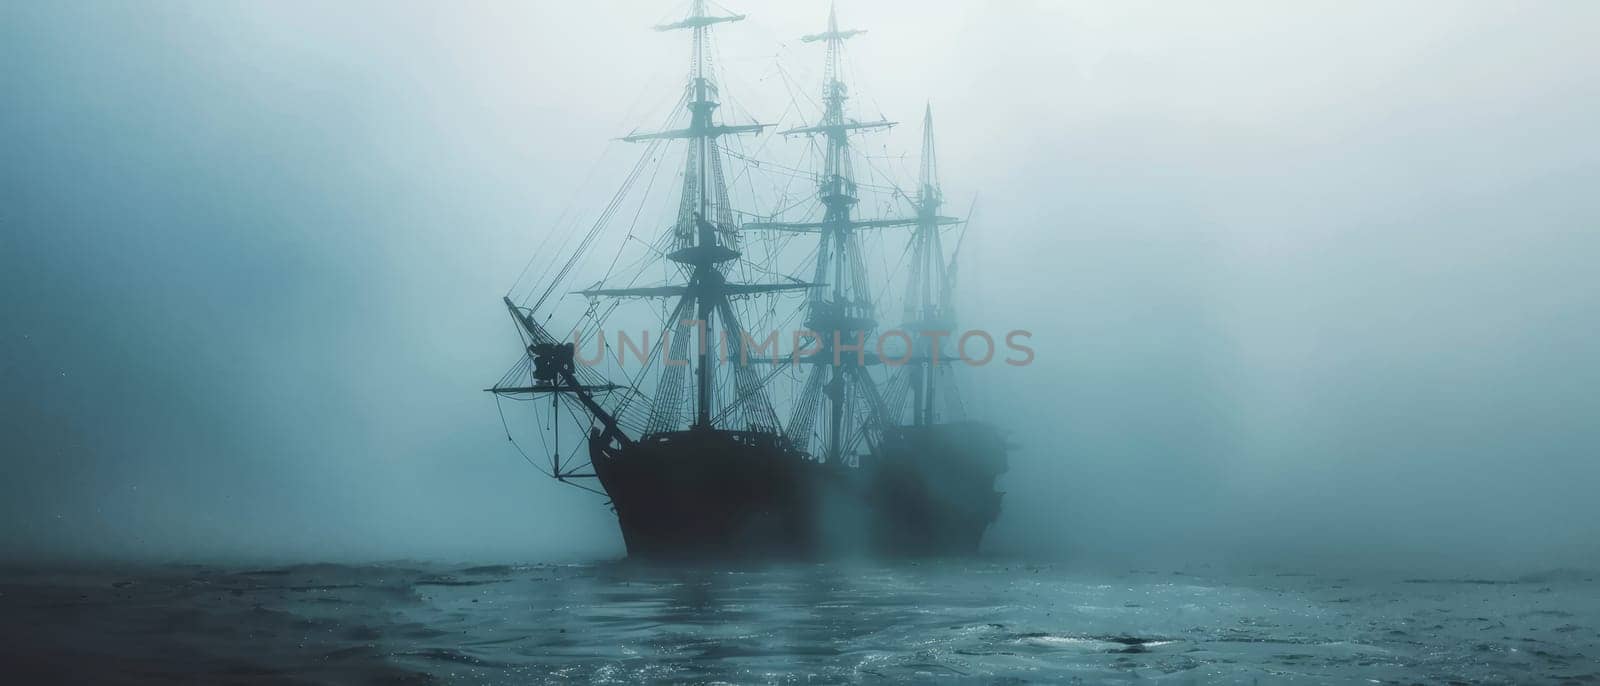 A ghostly sailing pirate ship emerges from a dense fog on the open sea, creating a mysterious and eerie maritime scene